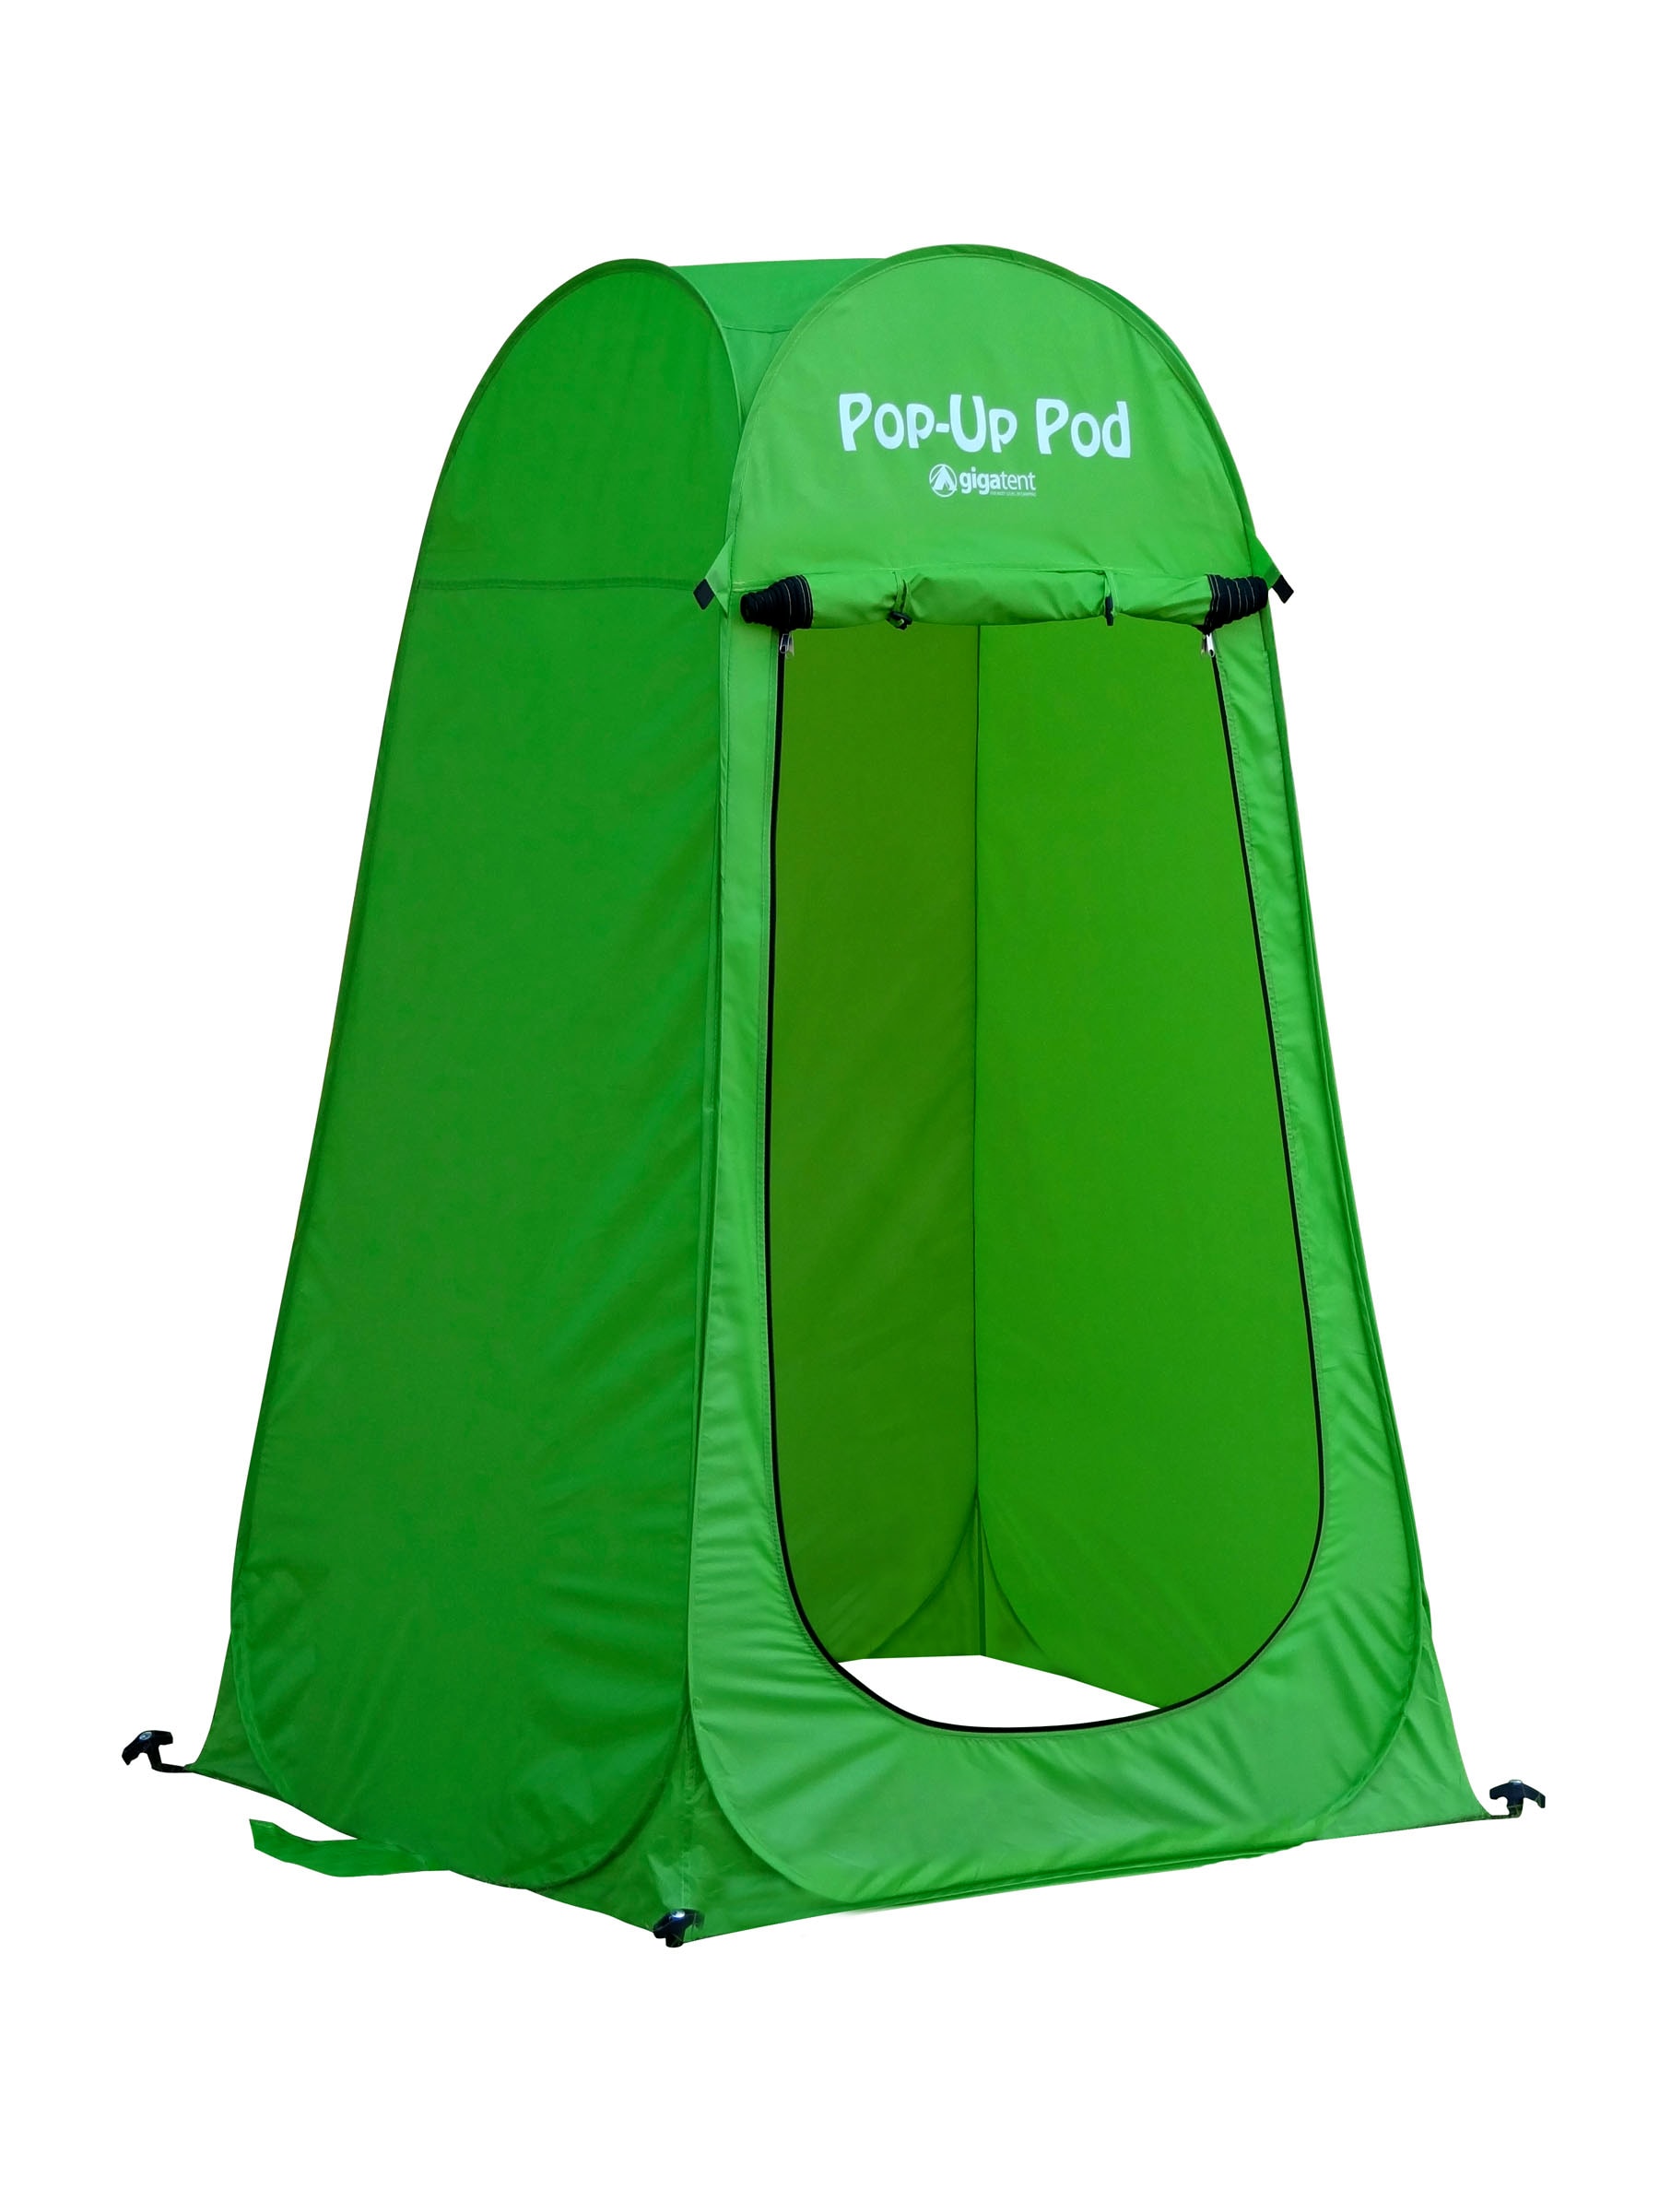 Merg Charlotte Bronte Achternaam Gigatent Pop Up Changing Room Polyester Tent in the Tents department at  Lowes.com